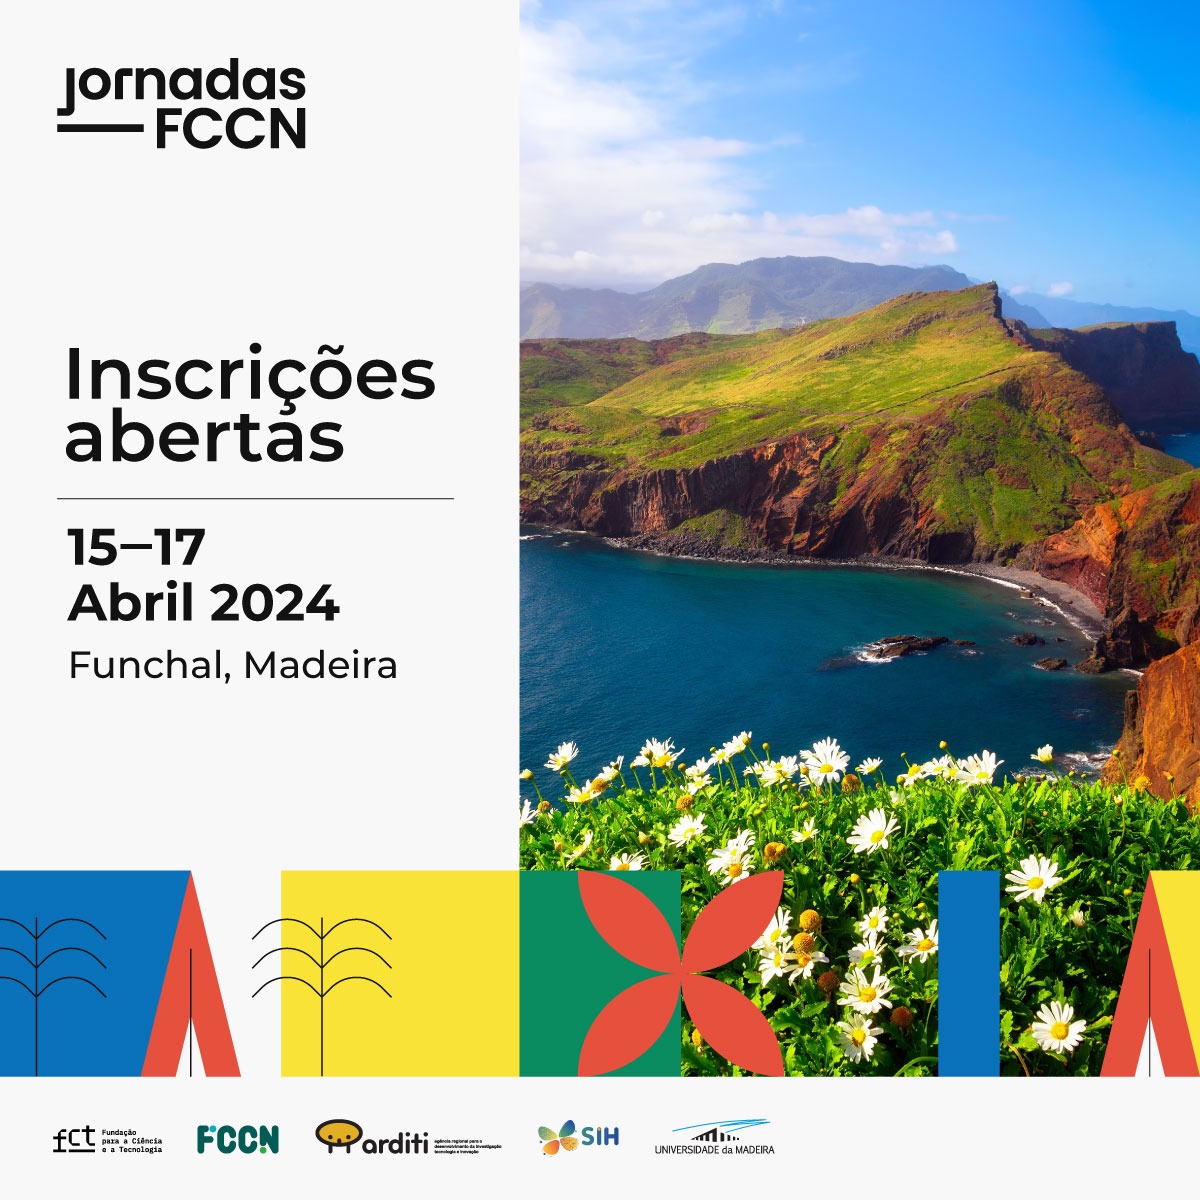 💬 April may seem a long way off, but you can already register for the #JornadasFCCN 2024! 📍This year's event will take place in Madeira, Funchal, from April 15 to 17. 🖇️ Secure your place: jornadas.fccn.pt/en/